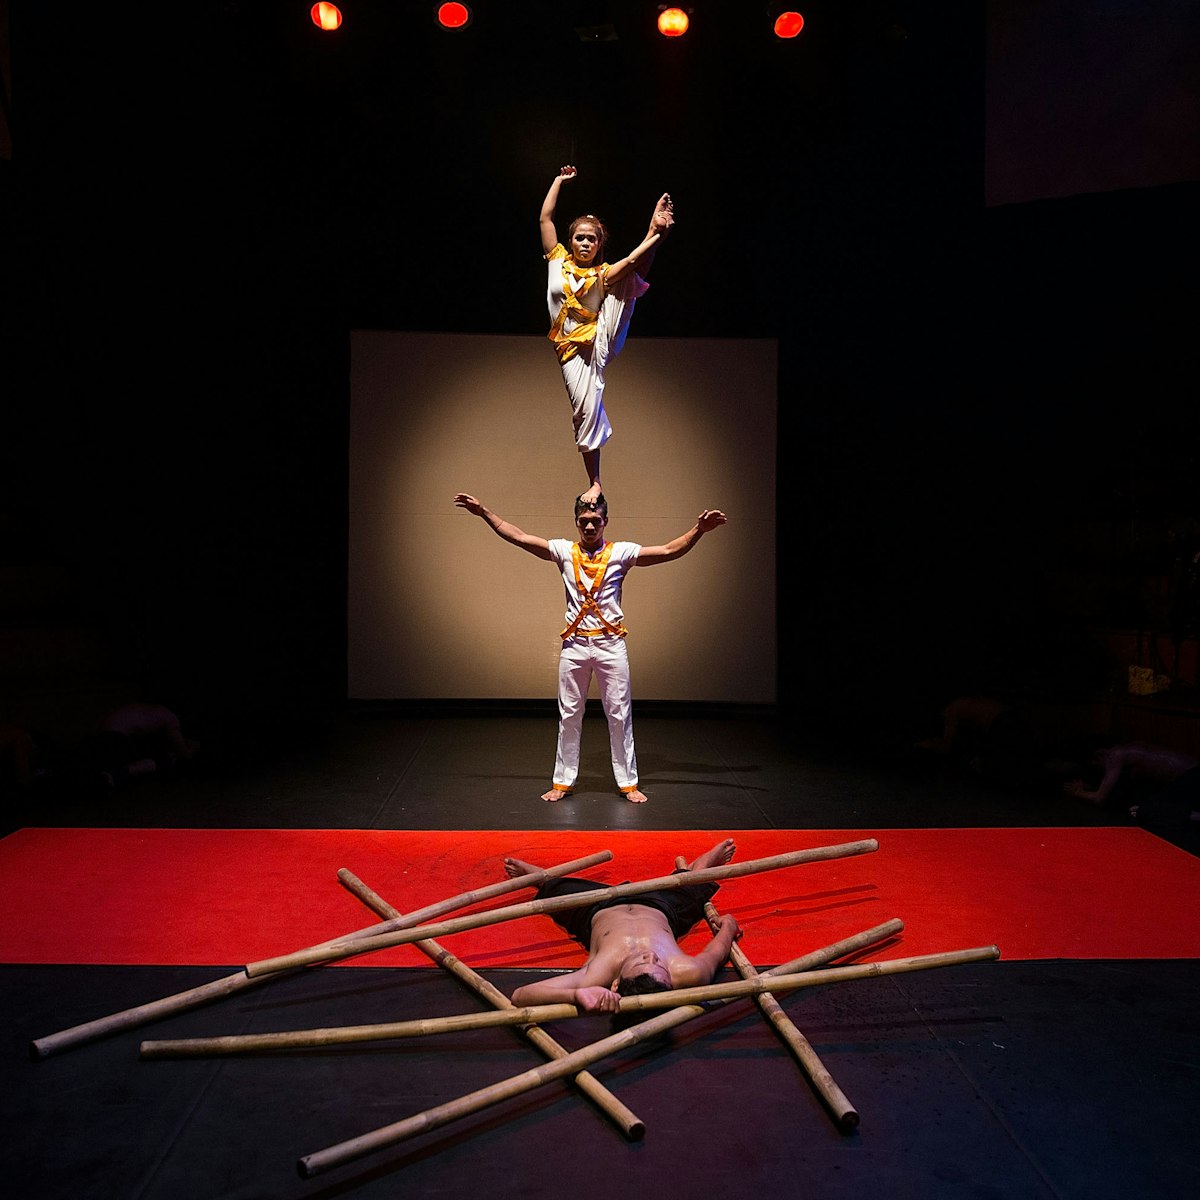 SIEM REAP, CAMBODIA - JULY 01:  Cambodian circus artists perform in front of a crowd of foreign tourists on July 1, 2015 during a performance of "Eclipse" at Phare - The Cambodian Circus in Siem Reap, Cambodia. Phare Ponleu Salpak is an organization providing free education and artistic training to Cambodian children. Students in the organization's circus program often go on to careers performing both internationally and domestically at venues like Phare - The Cambodian Circus in Siem Reap.  (Photo by Taylor Weidman/Getty Images)